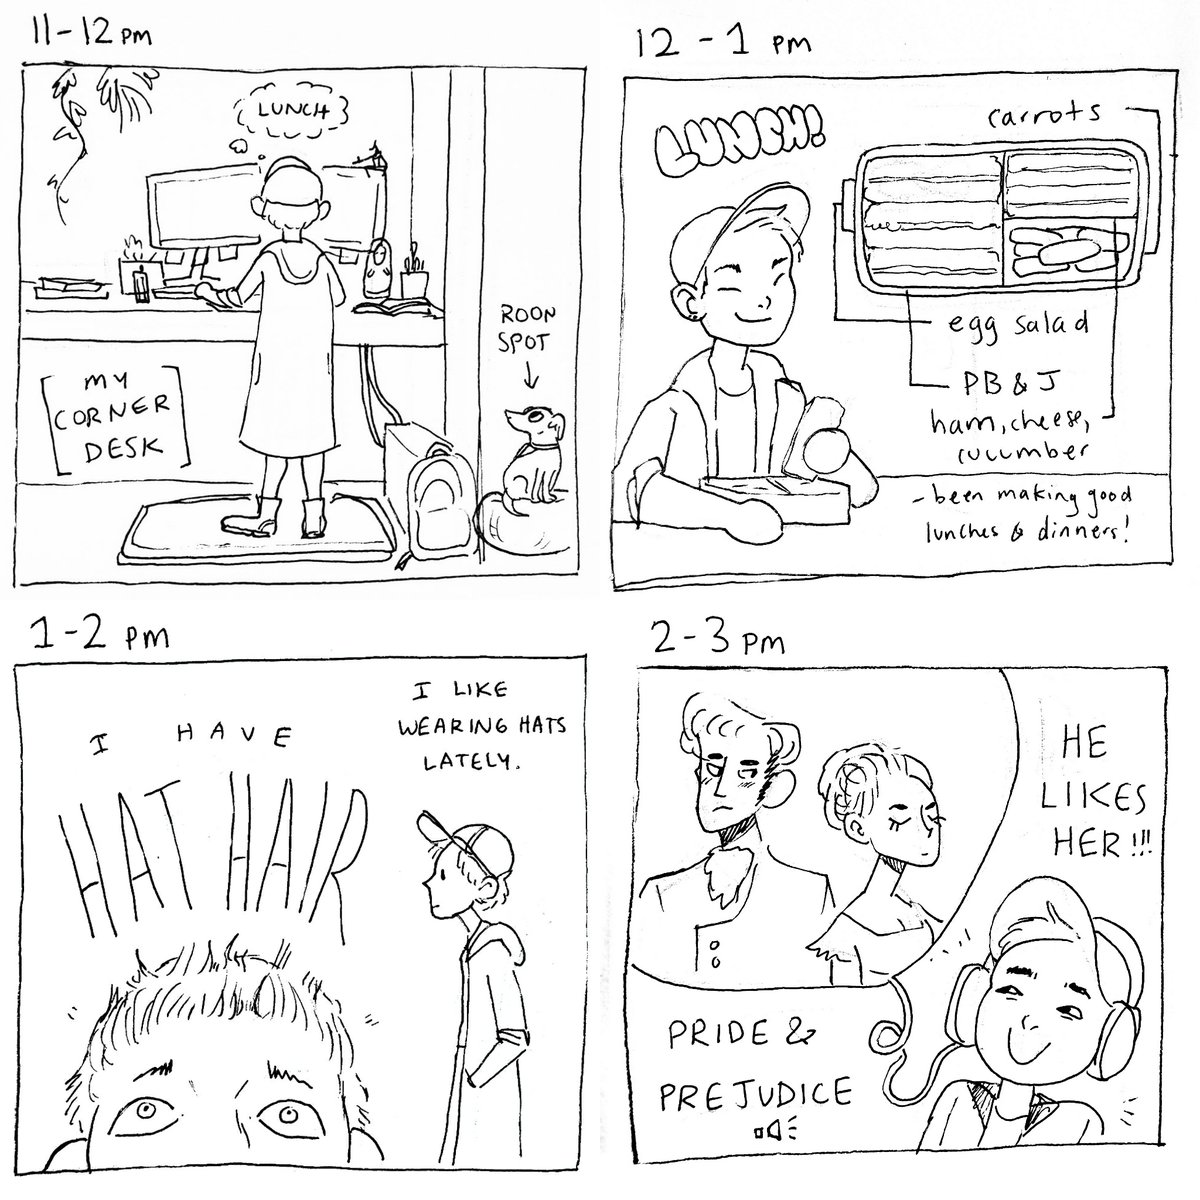 annd here's my 2018 hourly comics, which I cannot find the thread for lol 